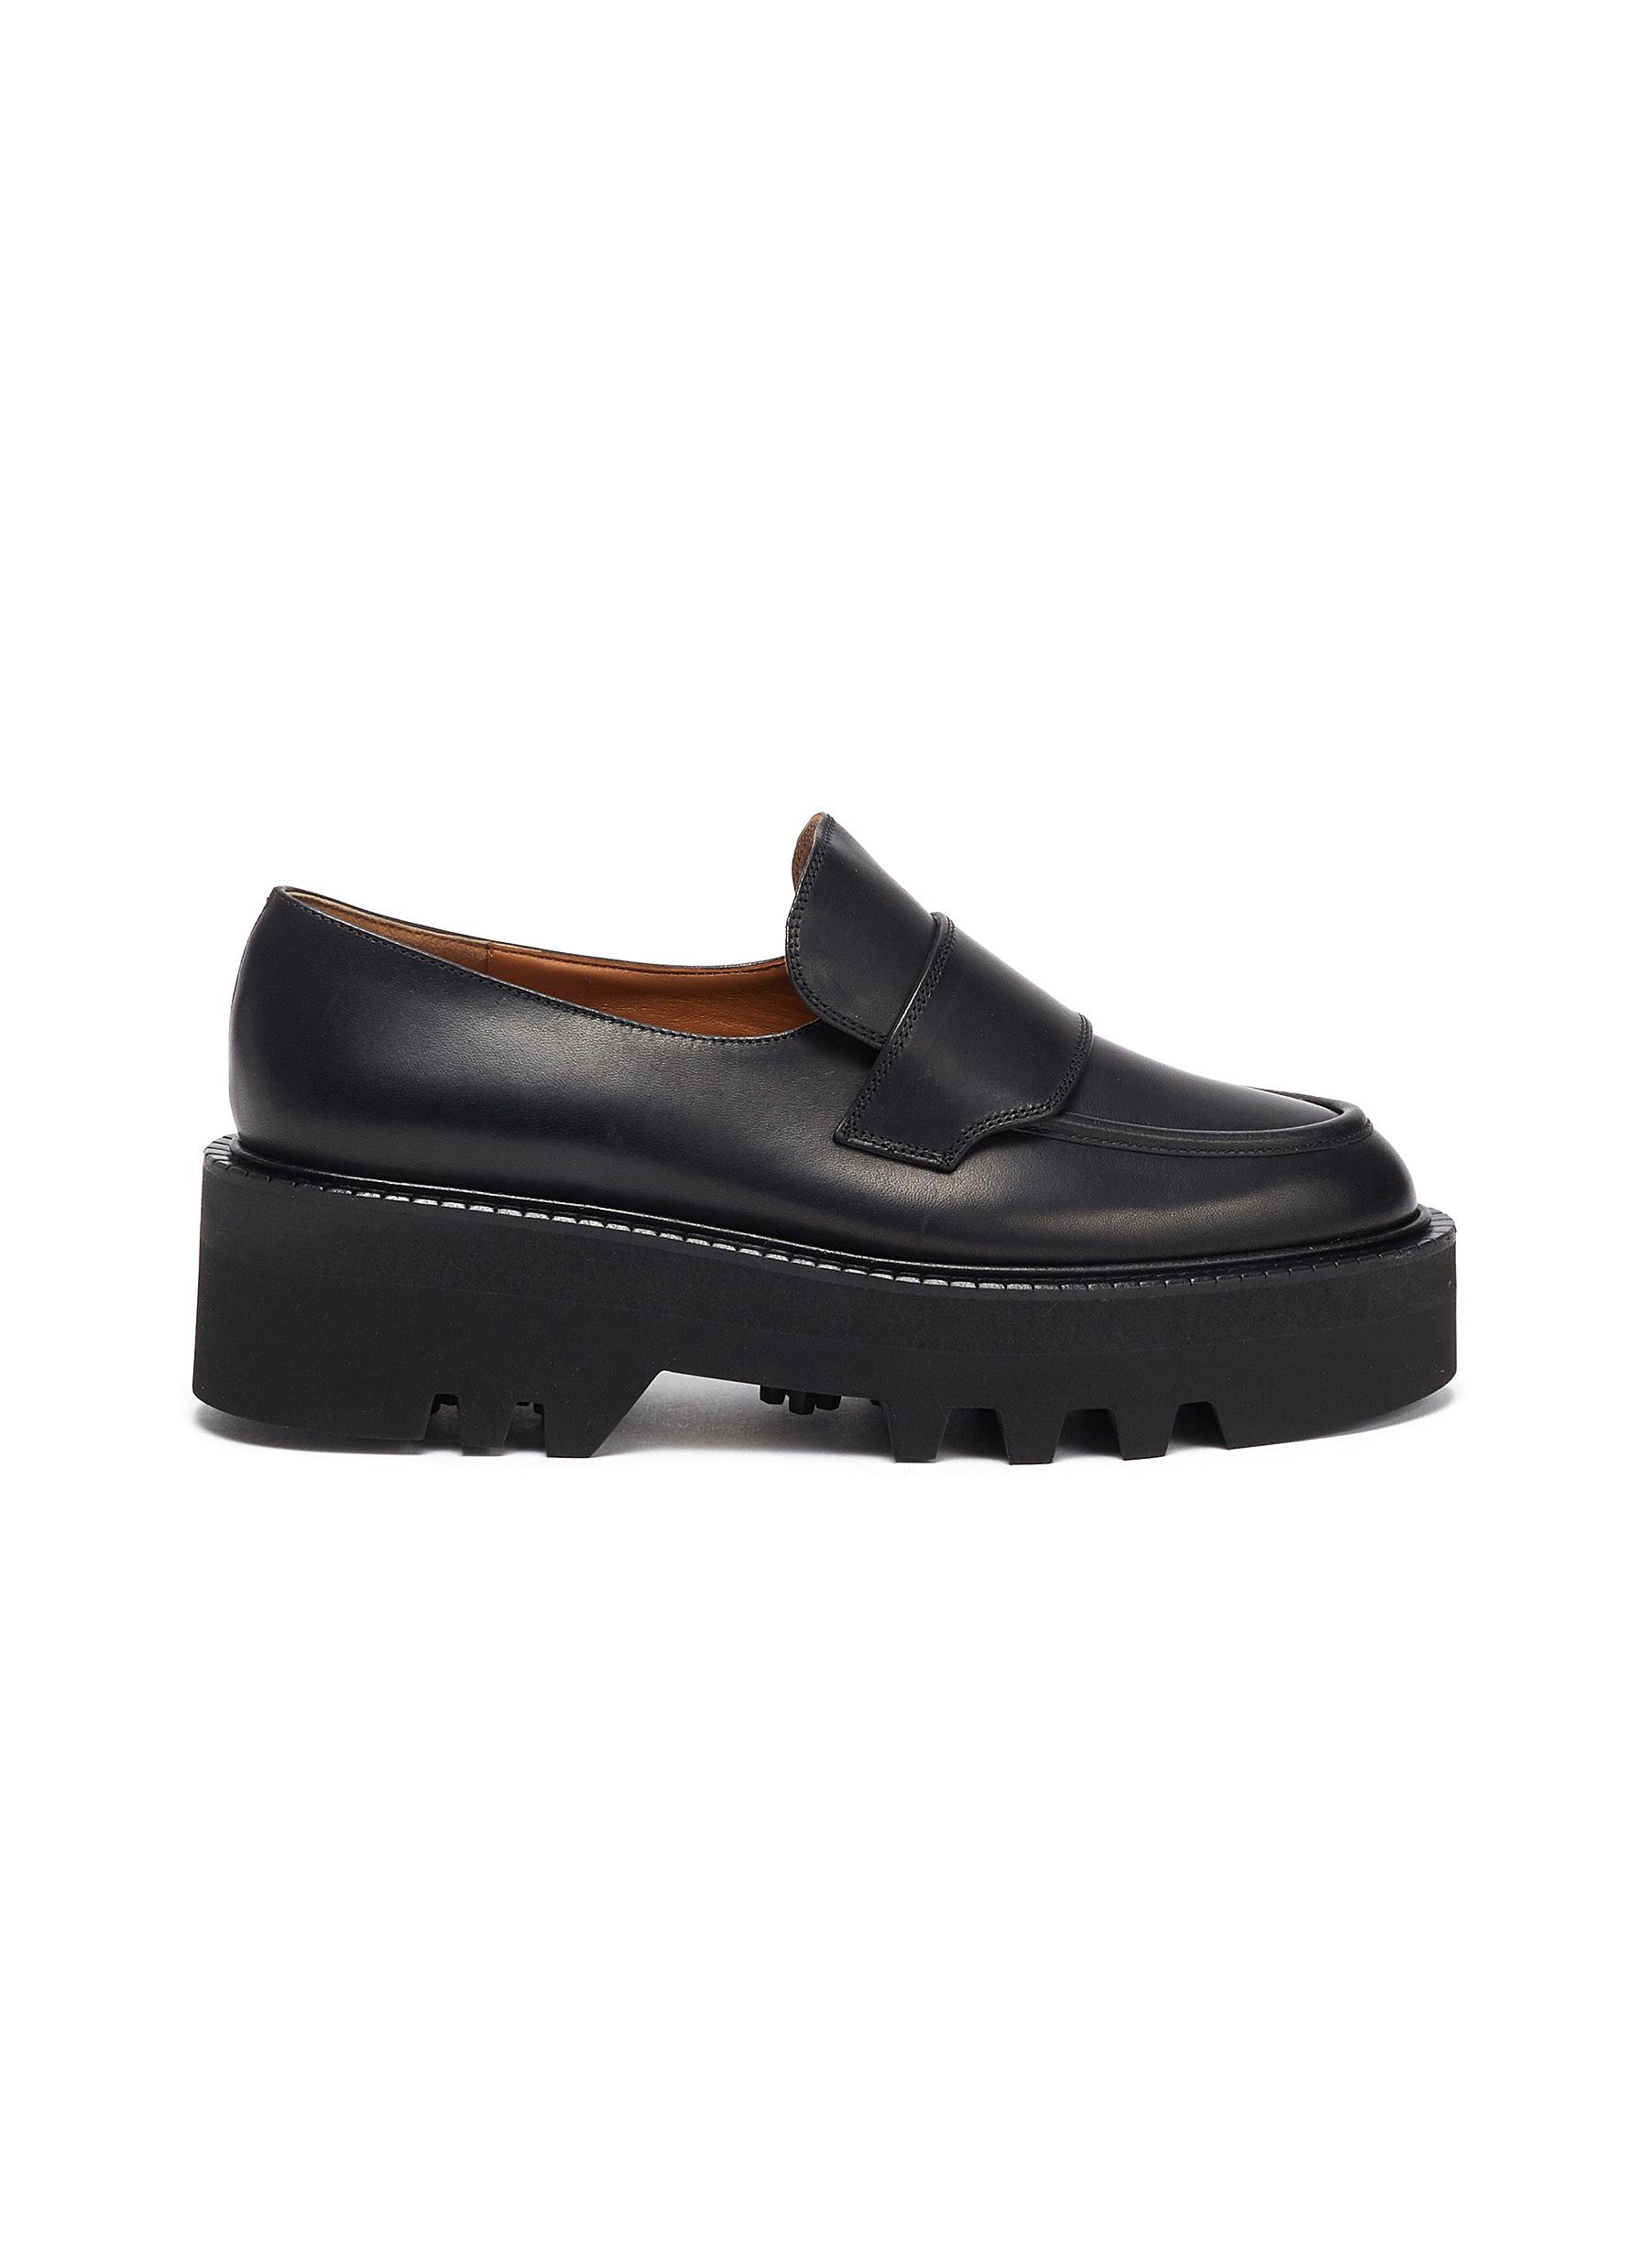 Pescara' Leather Loafers